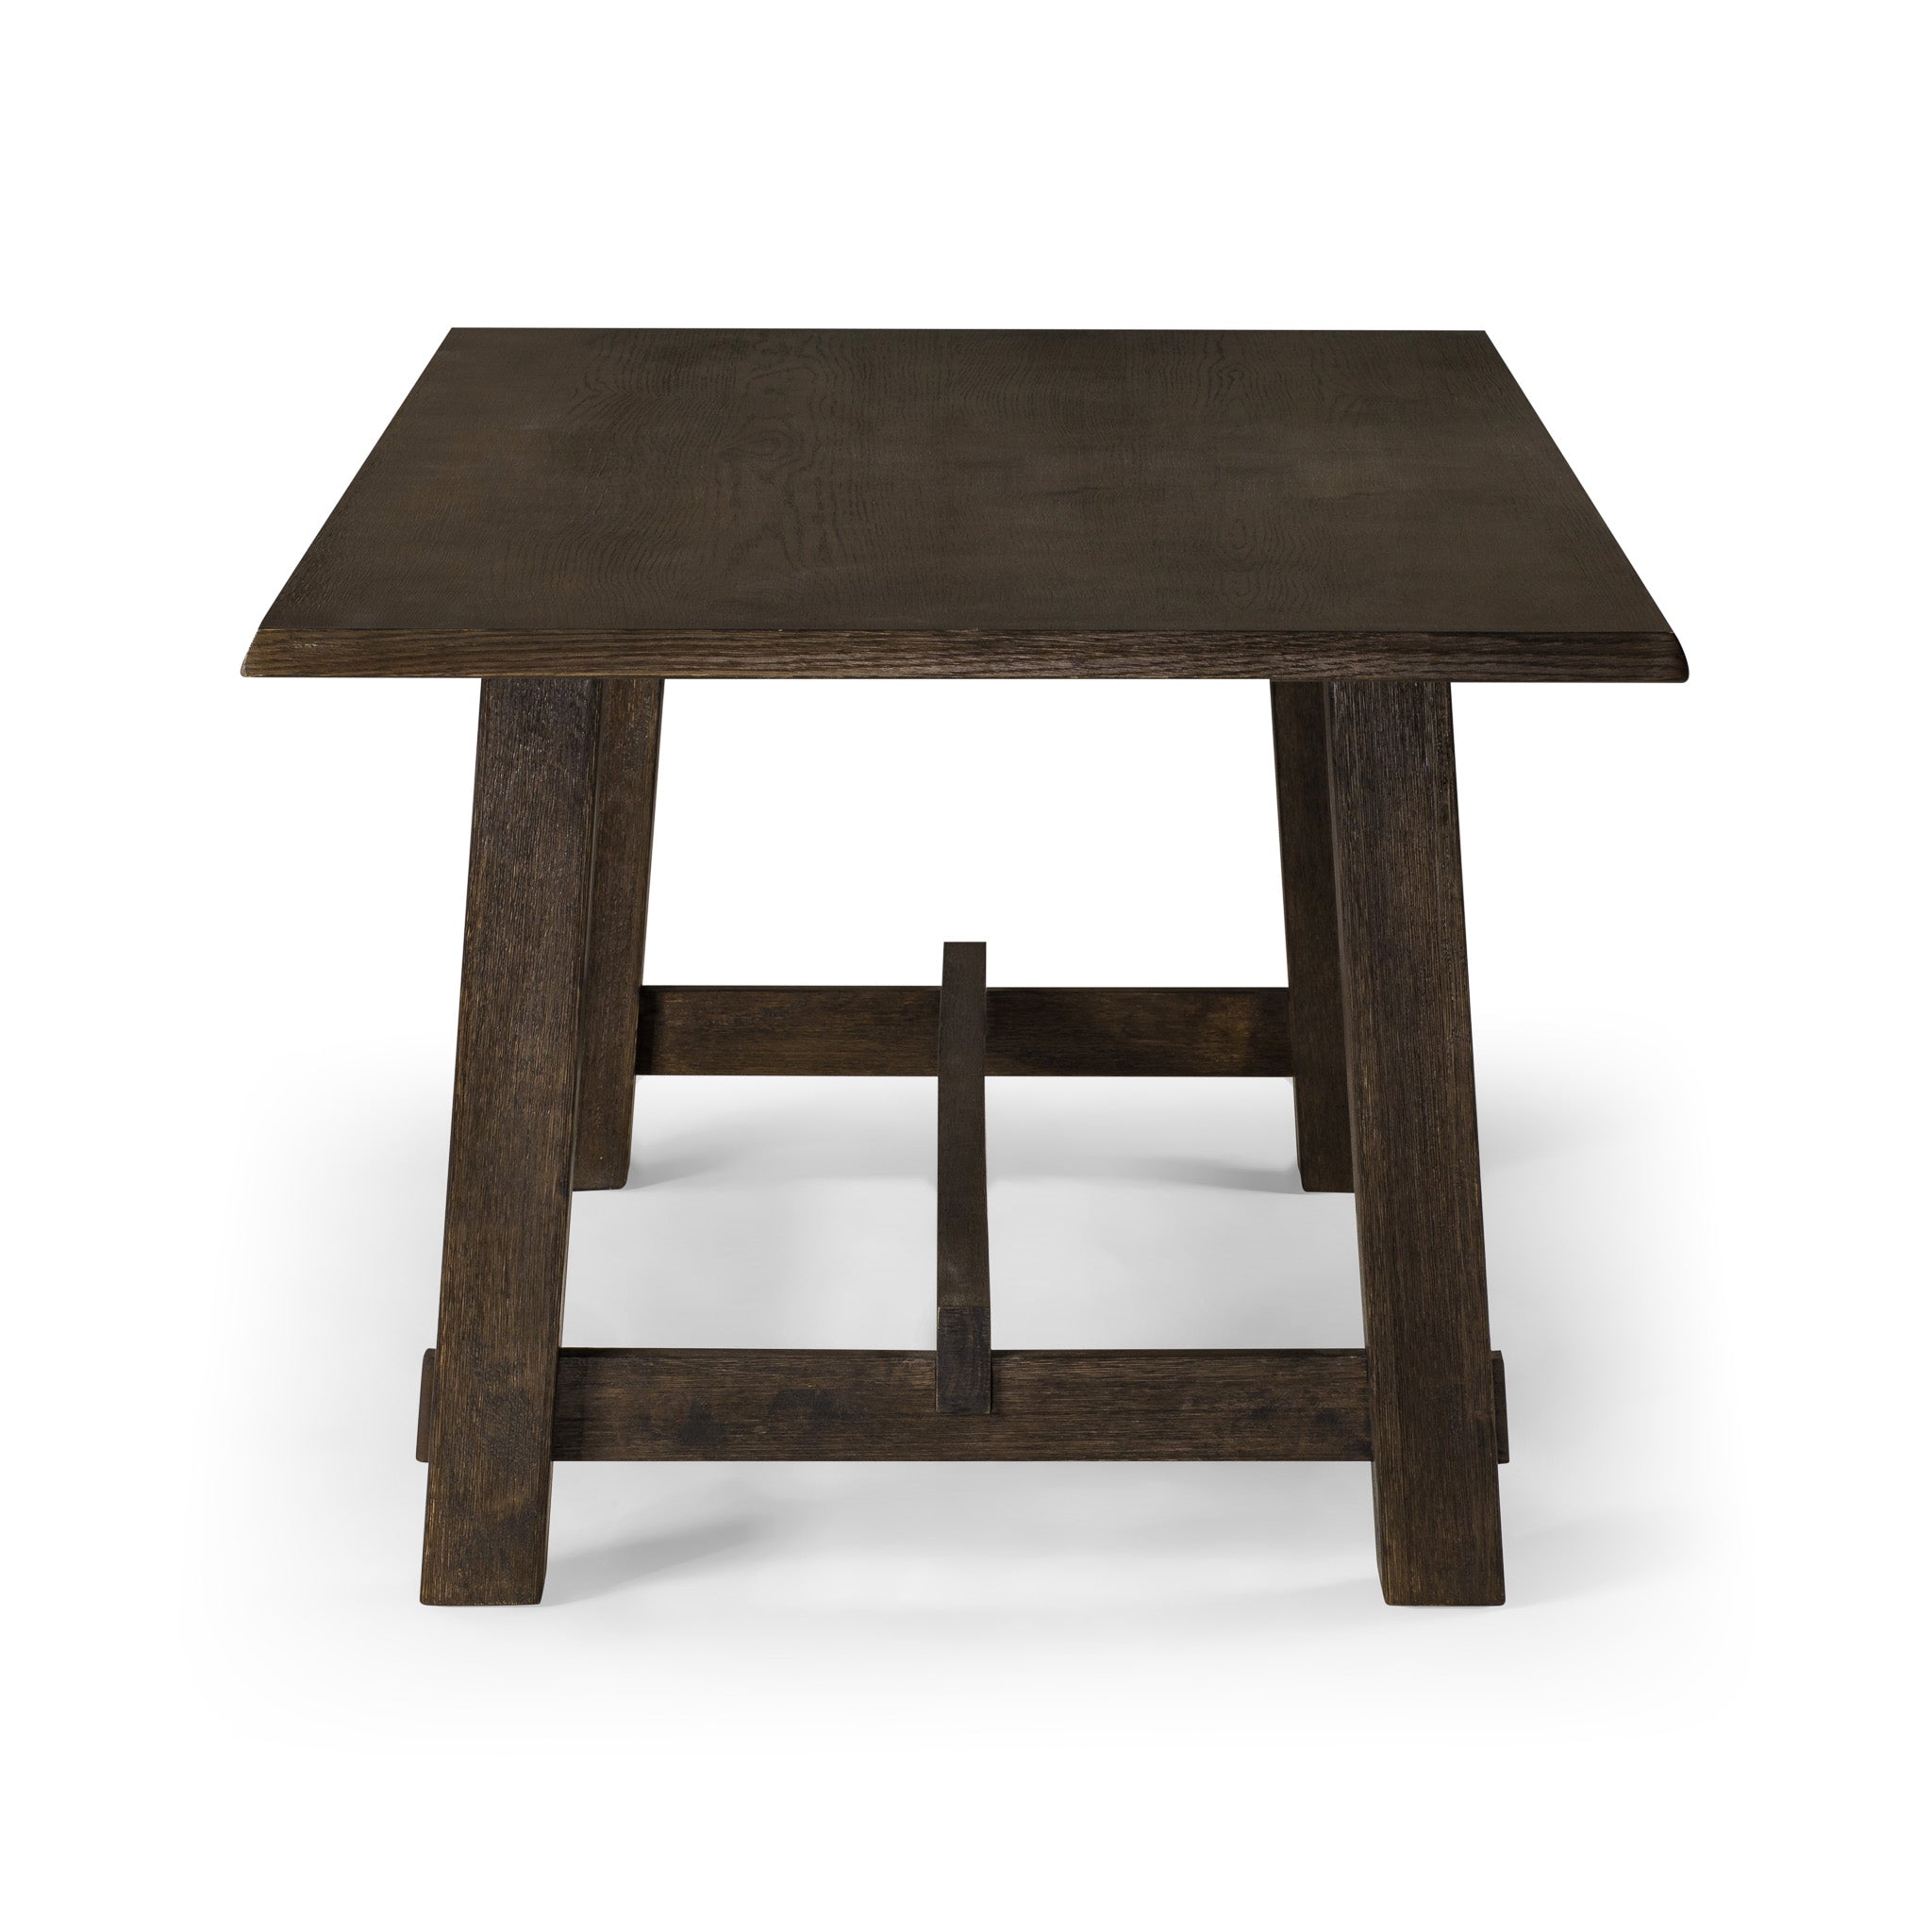 Yves Organic Rectangular Wooden Dining Table in Weathered Brown Finish in Dining Furniture by Maven Lane